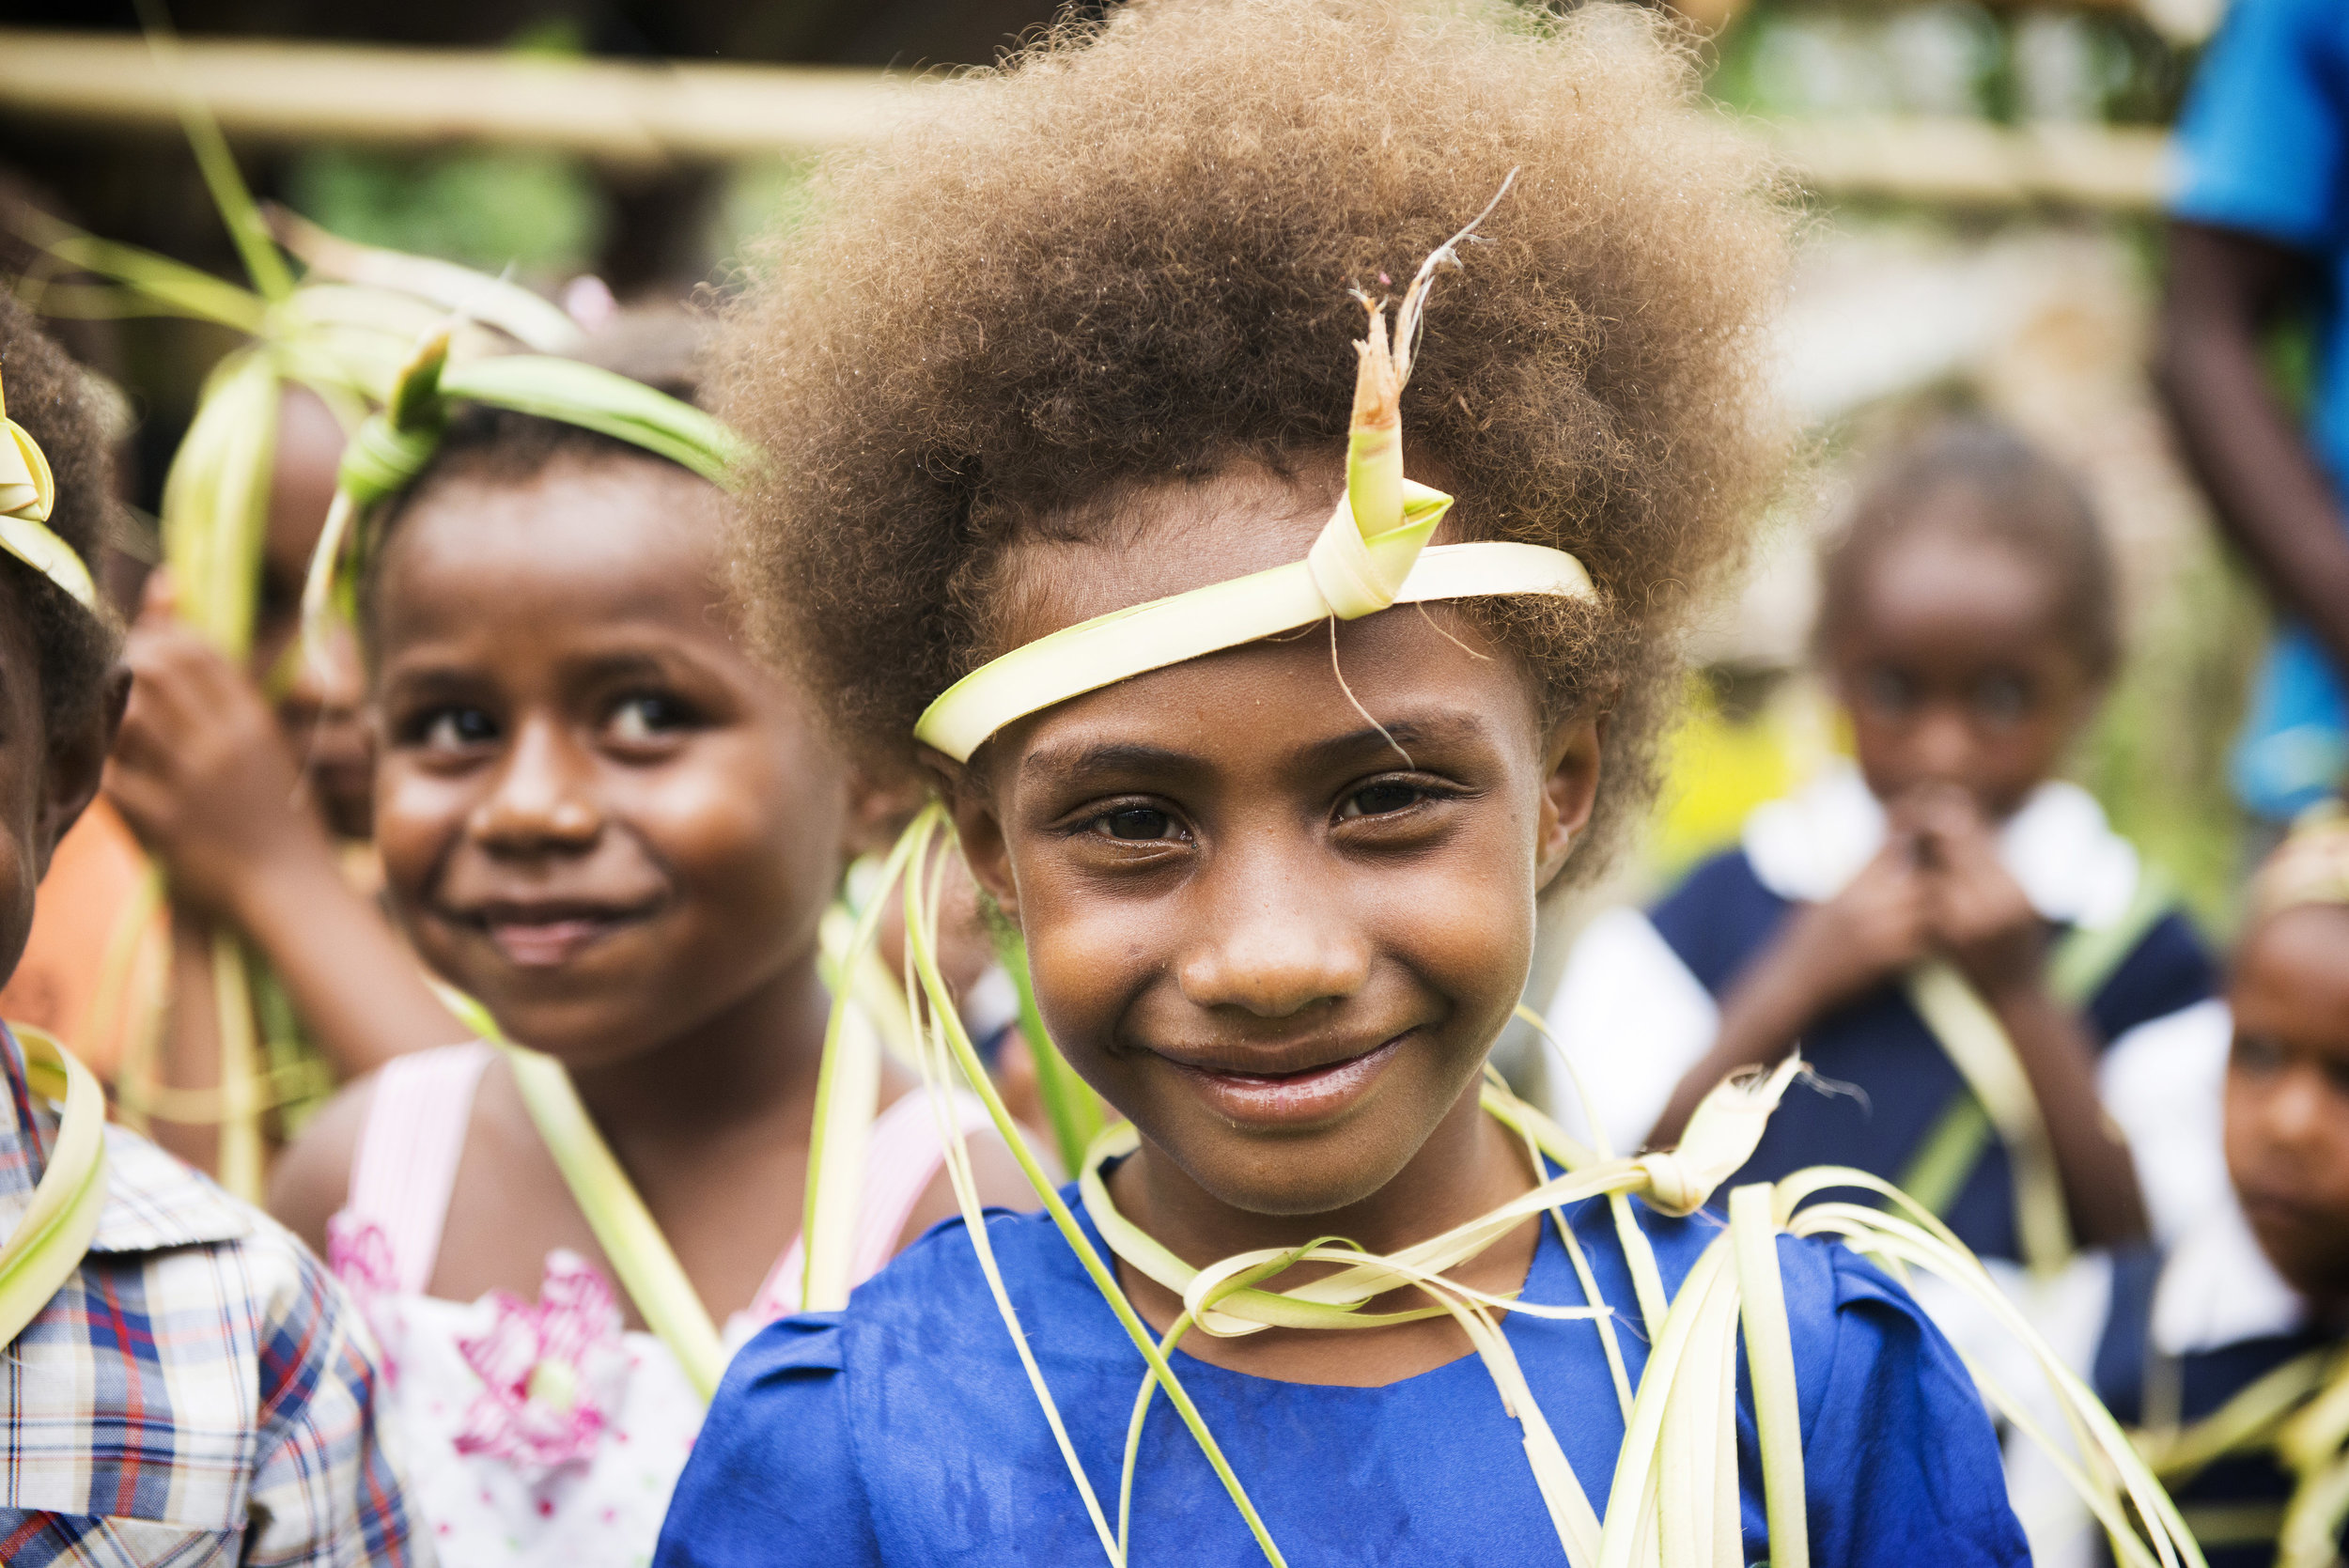  Kindy re-opening, 3 months on from Cyclone Pam. Tongoa, Vanuatu. 2015. 